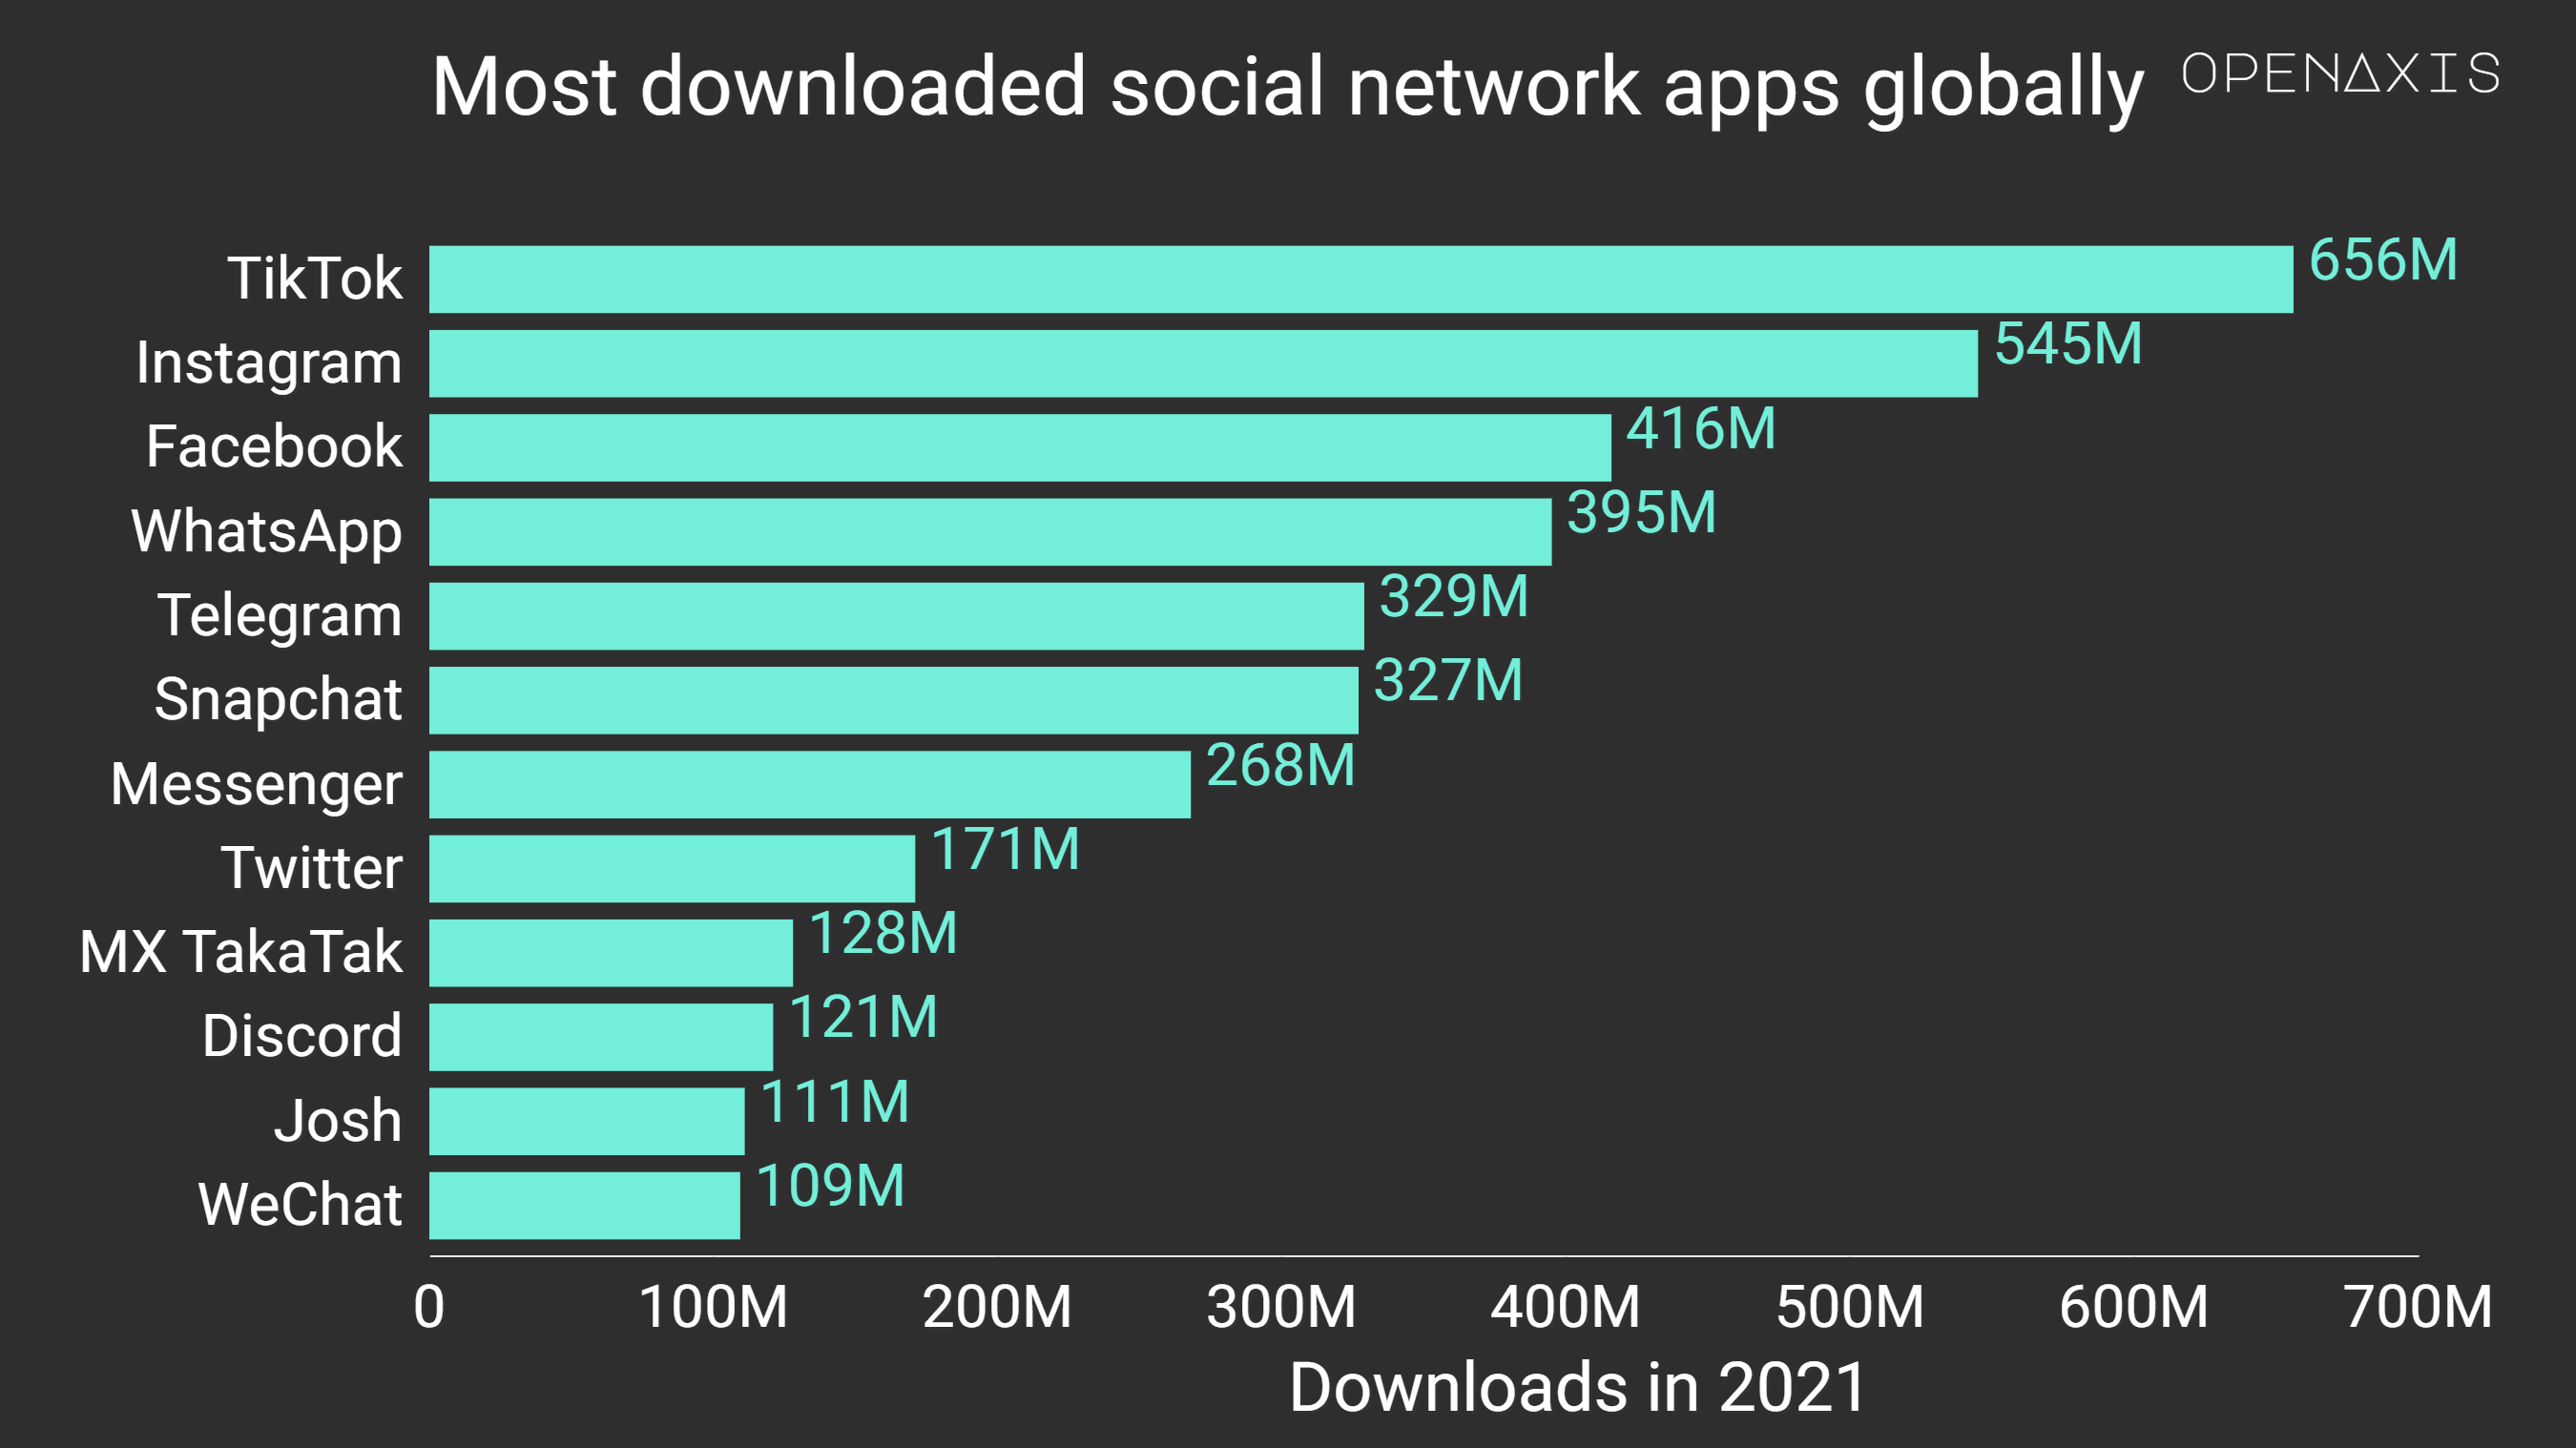 "Most downloaded social network apps globally"